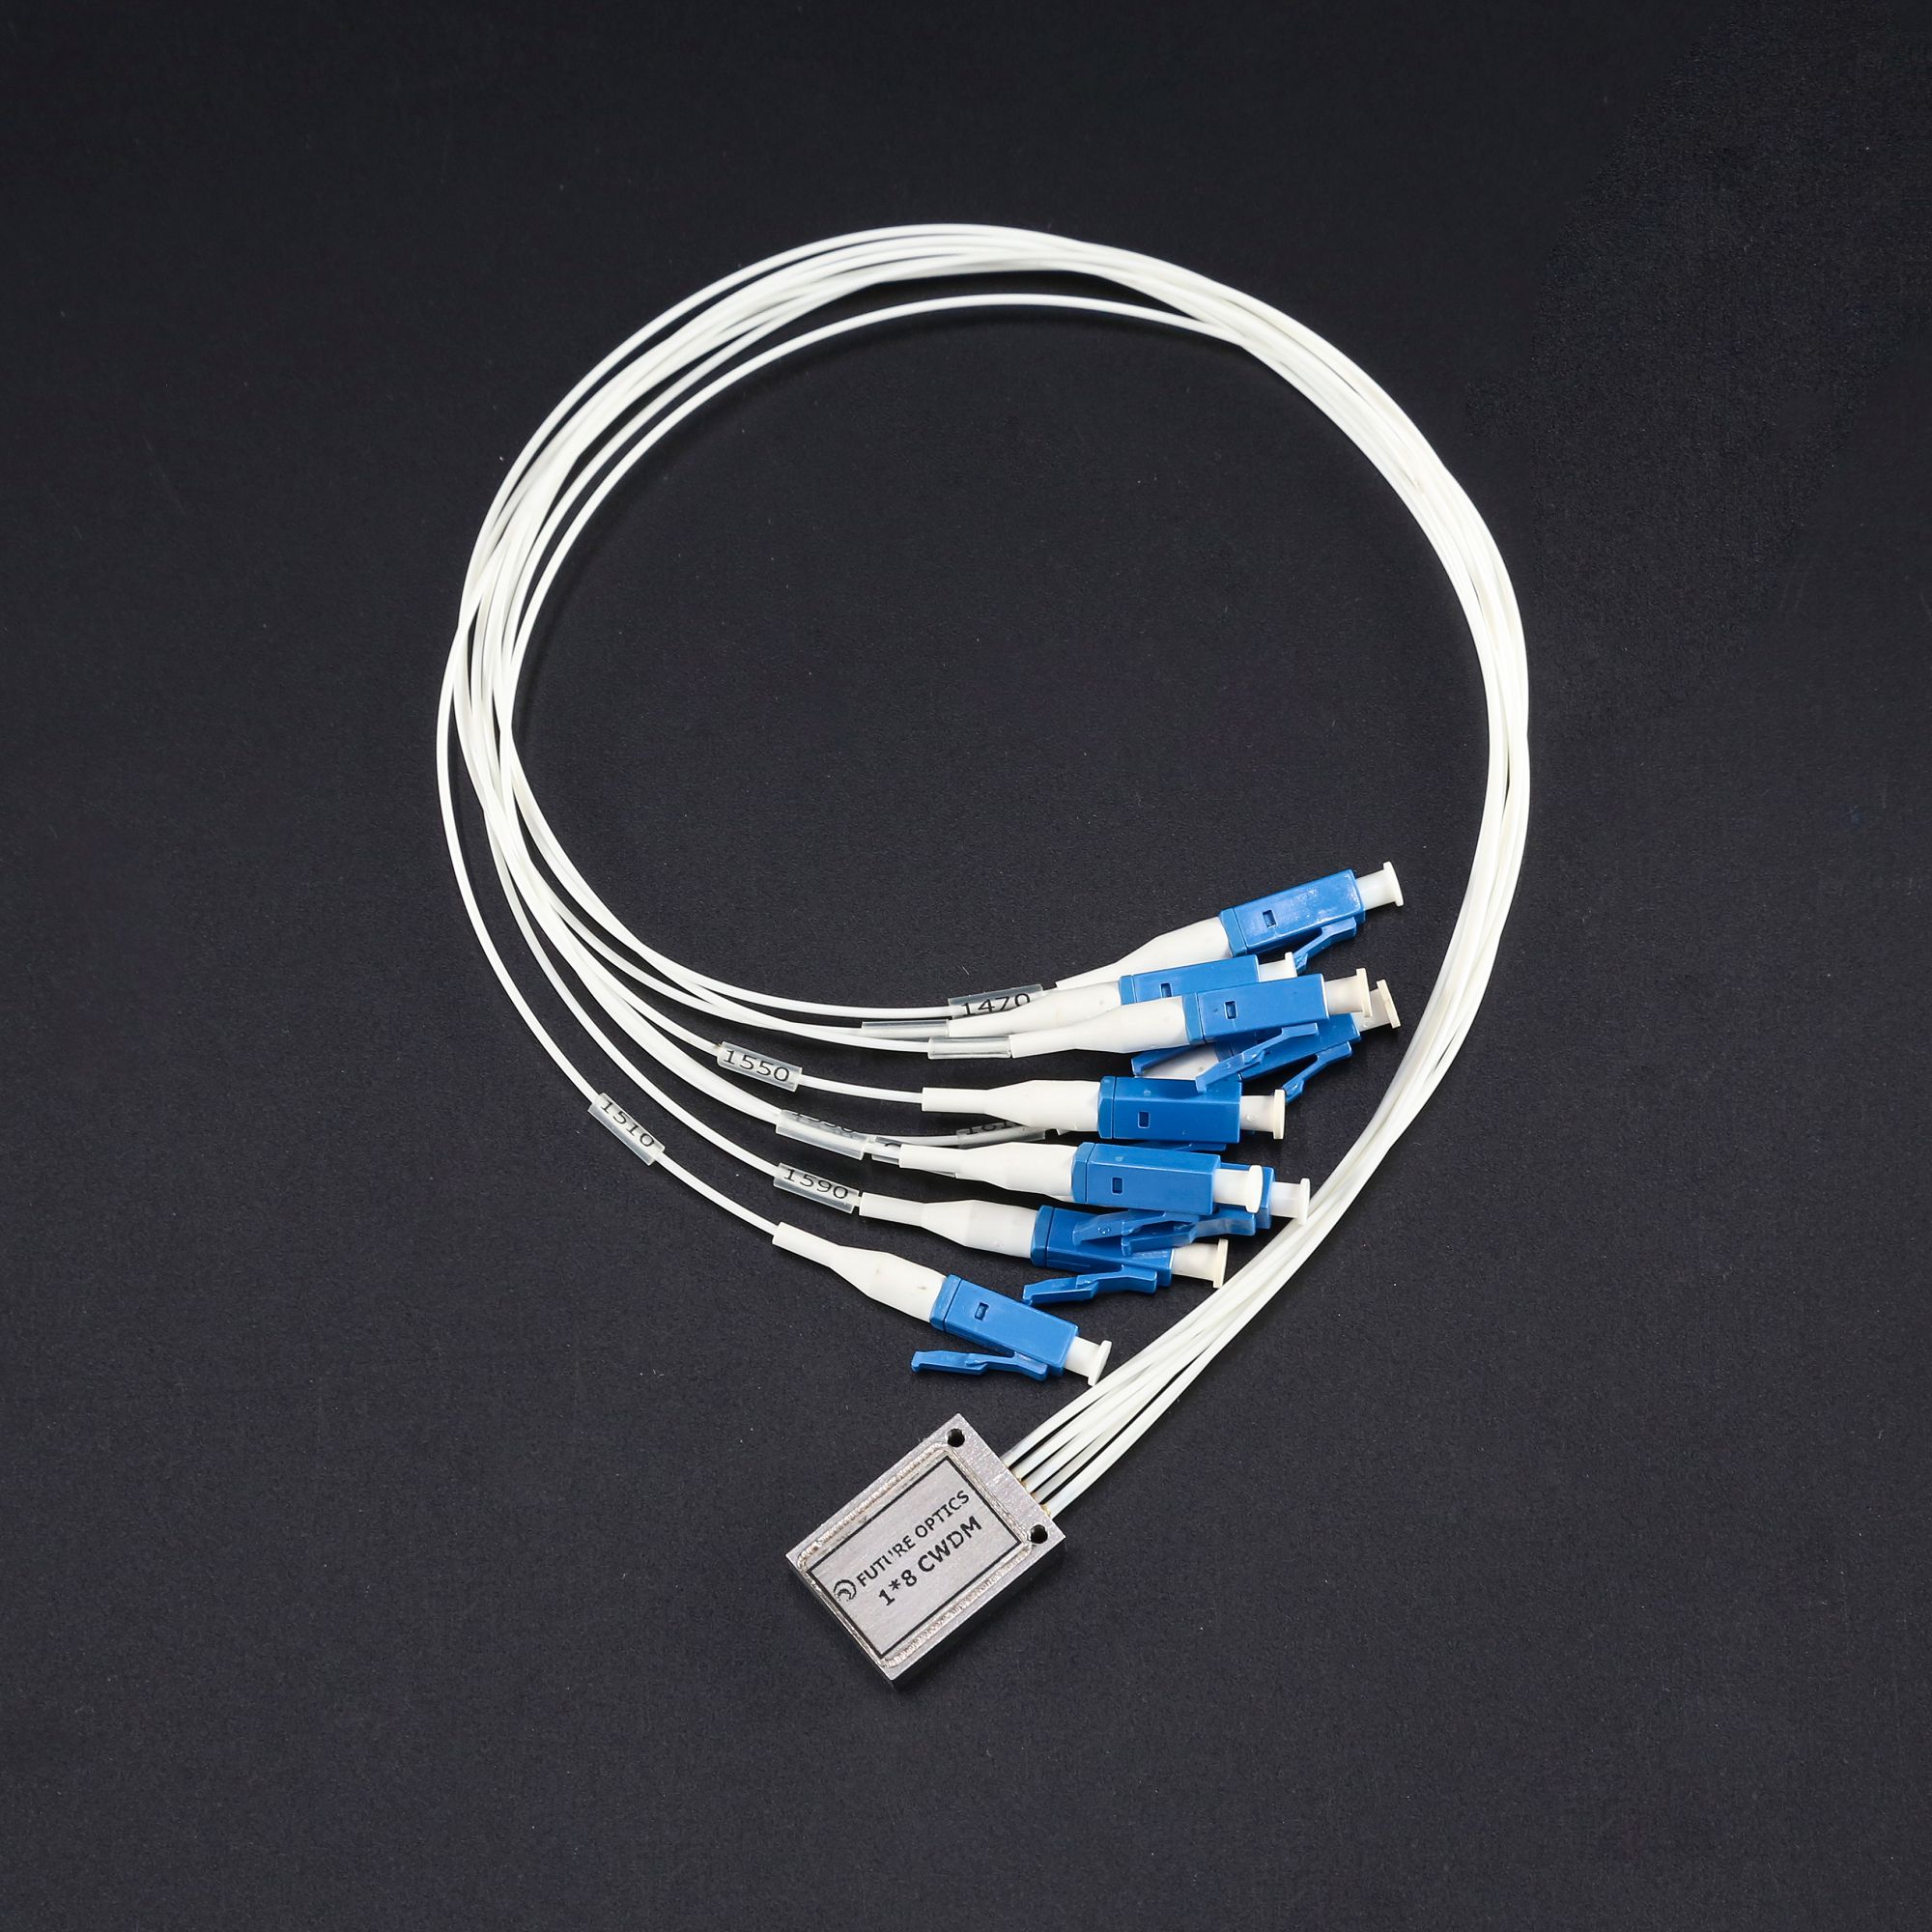 8 channels 1271-1411nm, 3D free space, unilateral fiber outlet,1.2dB typical IL,